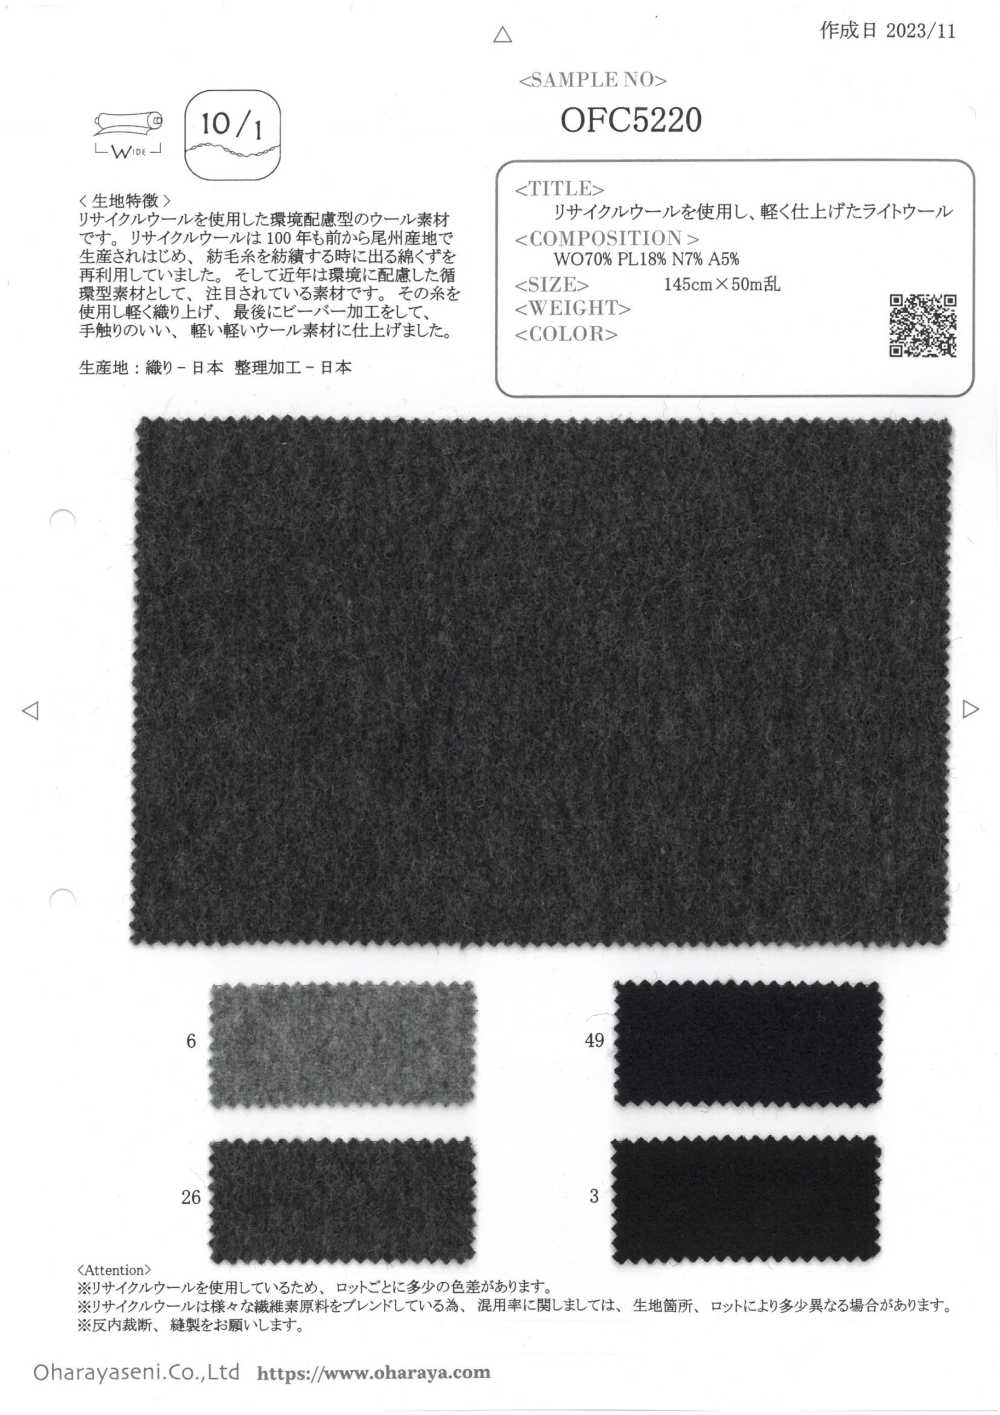 OFC5220 Light Wool Made From Recycled Wool With A Light Finish[Textile / Fabric] Oharayaseni